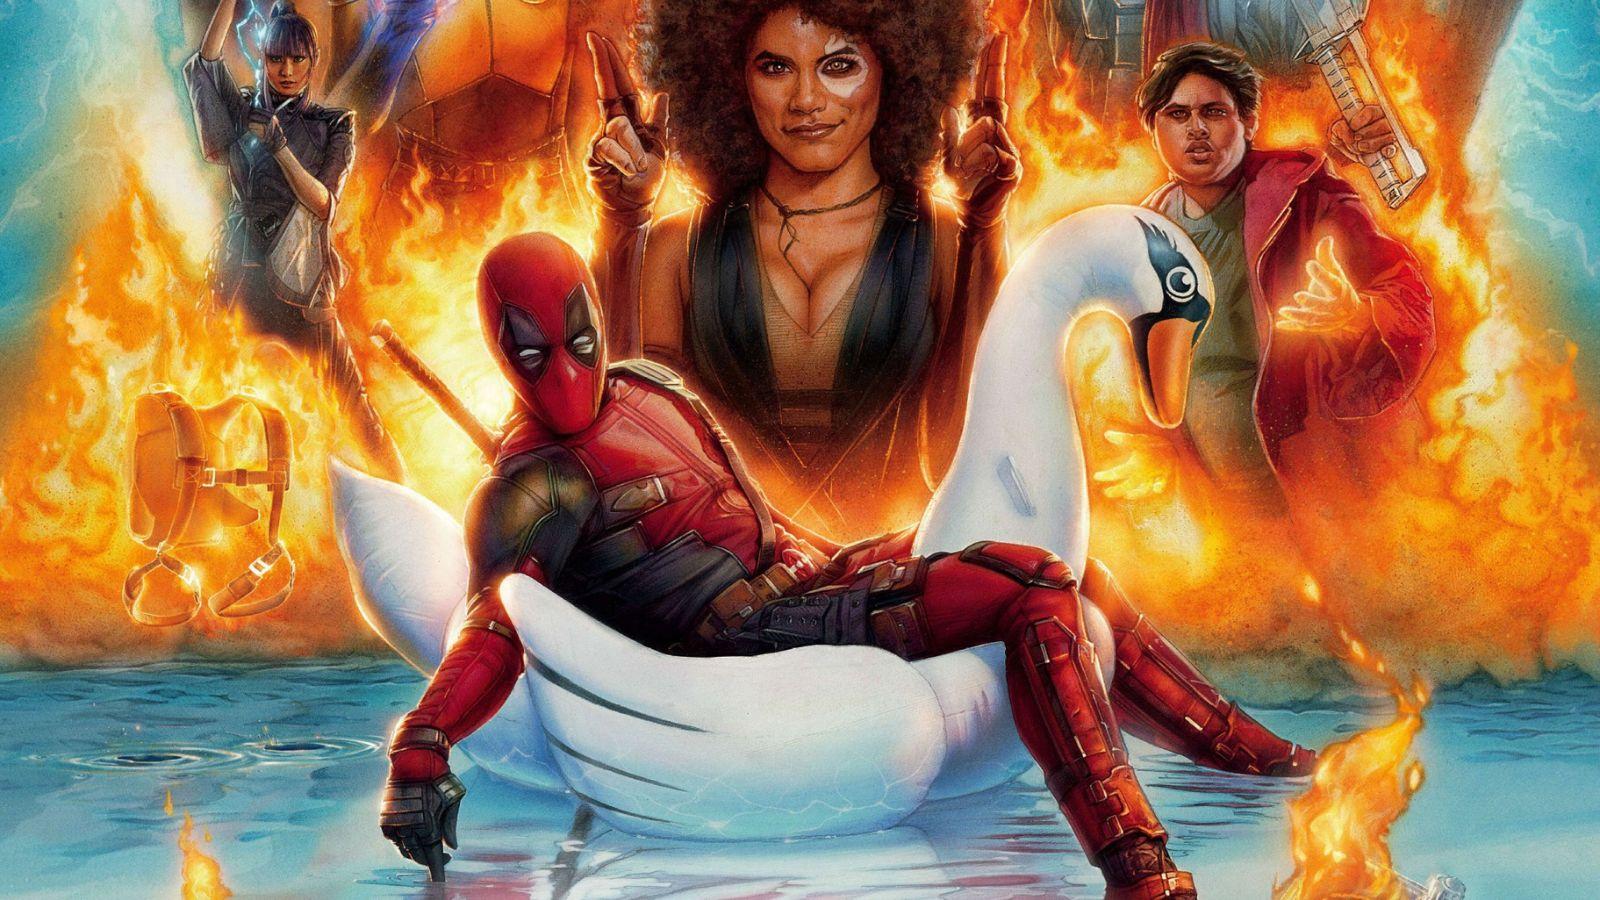 The Deadpool 2 cast in an official poster.